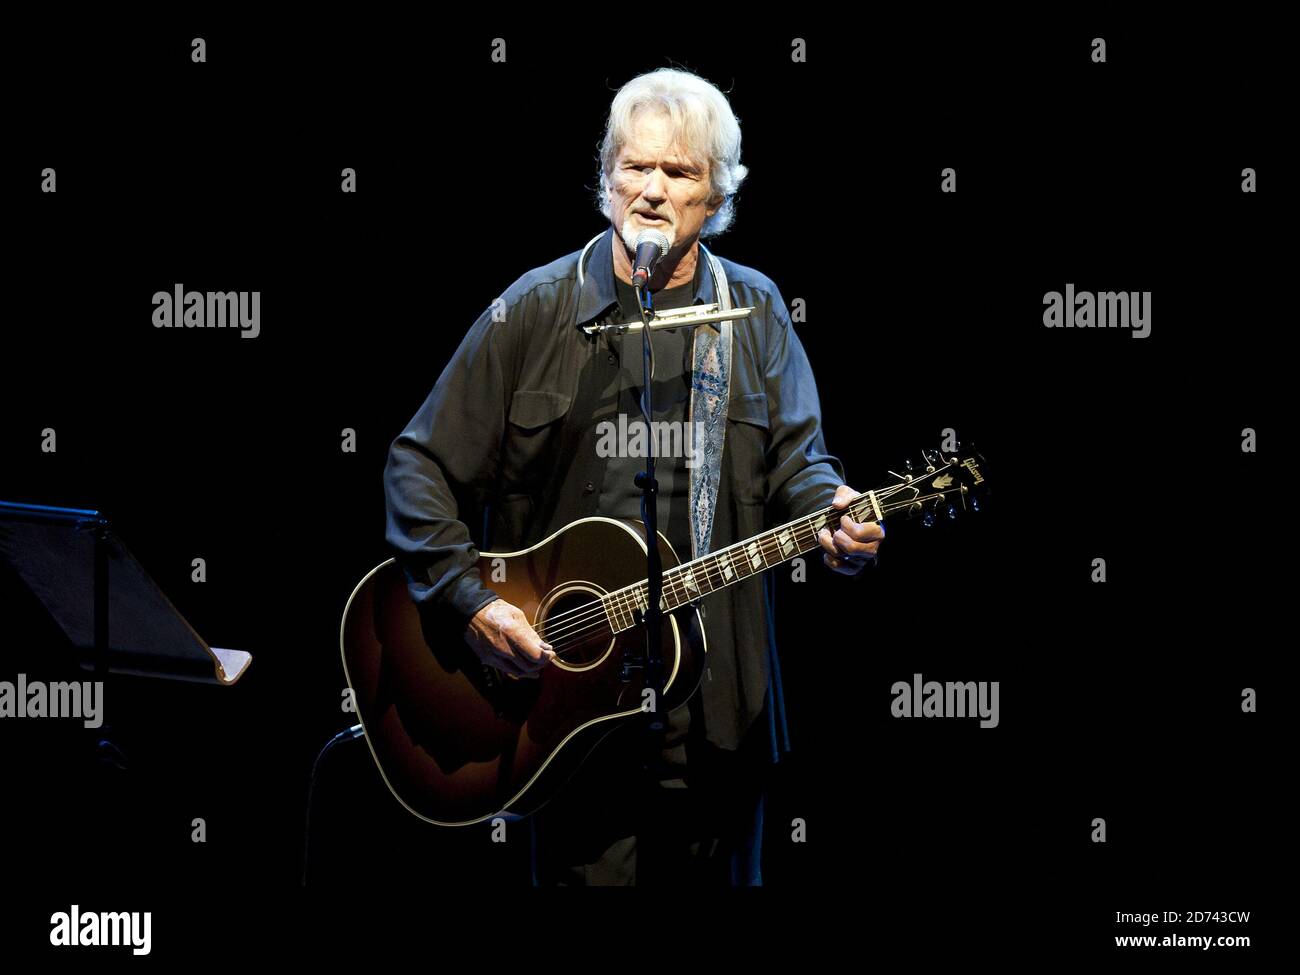 Kris Kristofferson performs live at the Cadogan Hall in central London.  Stock Photo